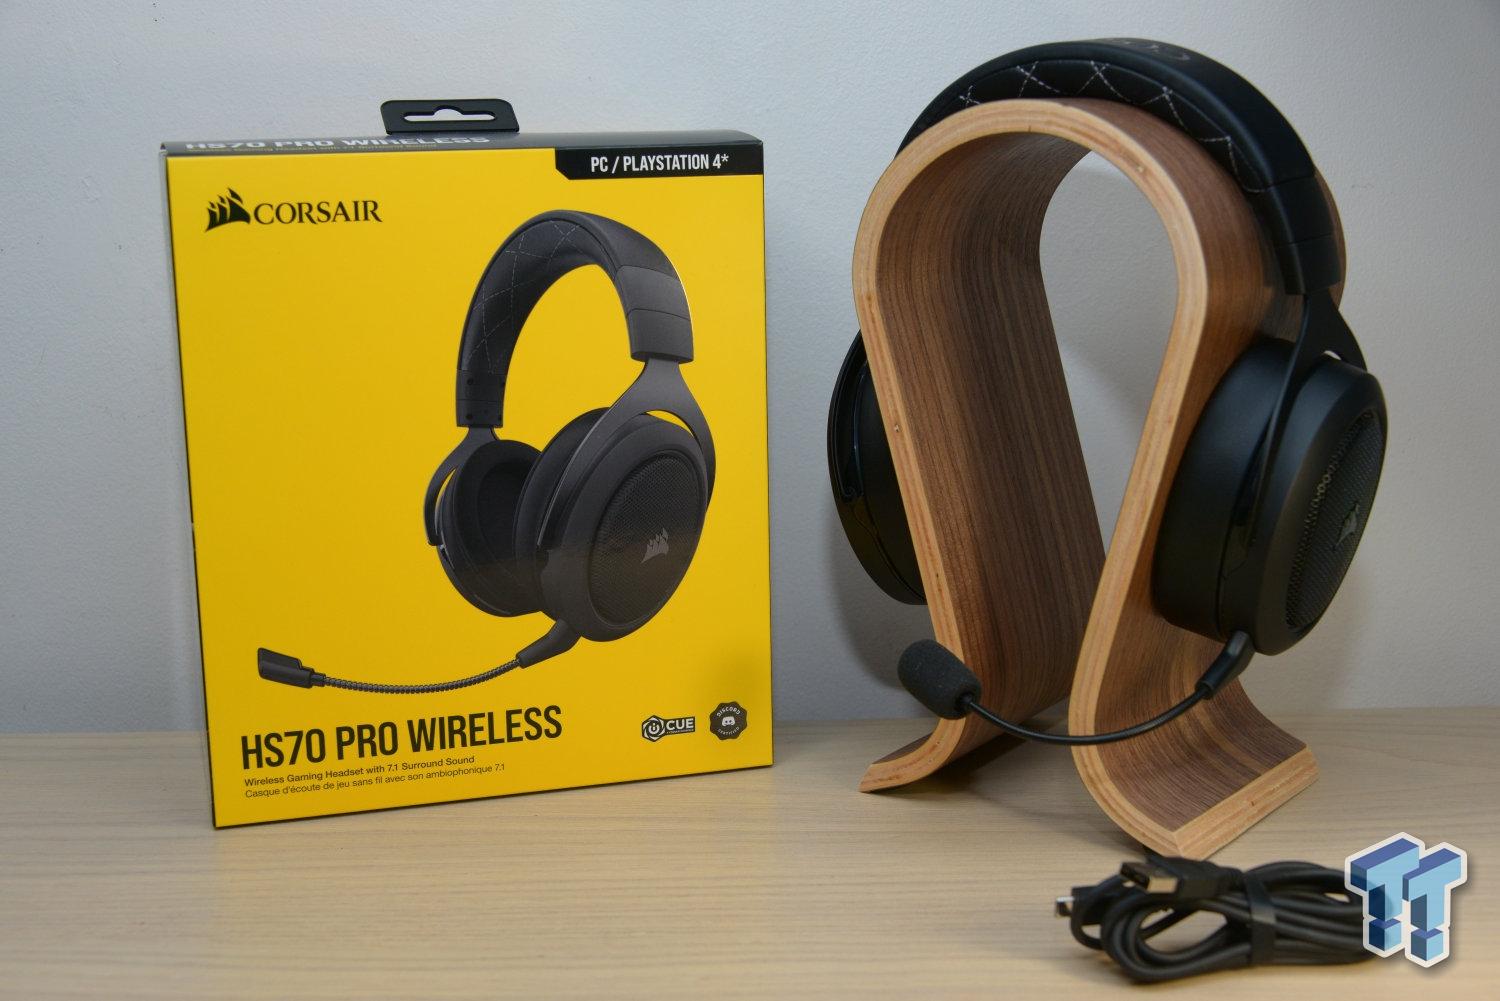 Hoes Munching honing Corsair HS70 Pro Wireless Gaming Headset Review